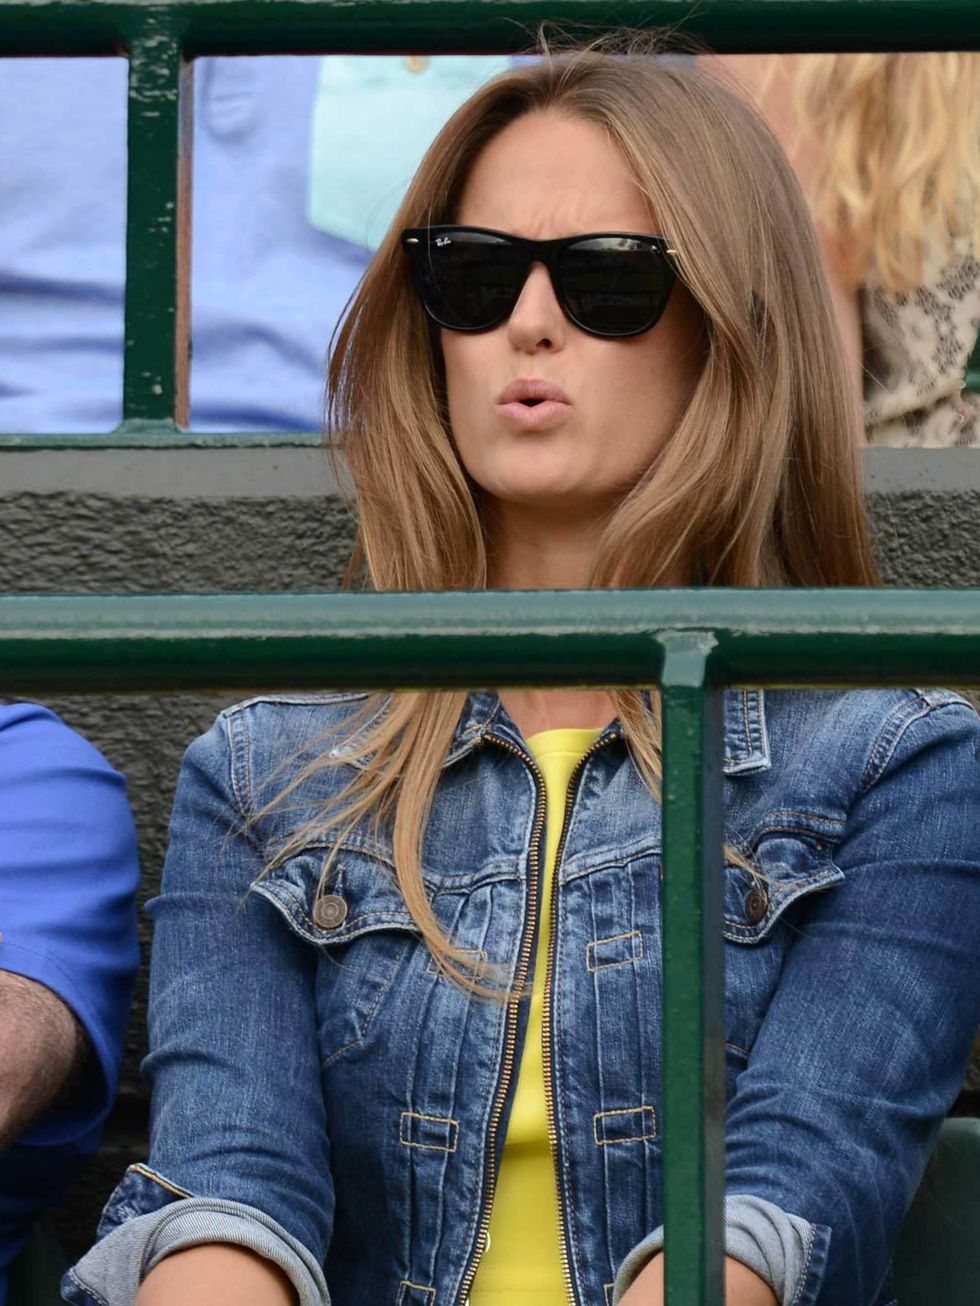 <p><strong>Kim Sears</strong></p><p><strong>WWAG Ranking:</strong> No.1</p><p><strong>Doubles with: </strong>Andy Murray</p><p>While Murray may be yet to lift the trophy on Centre Court, <a href="http://www.elleuk.com/star-style/celebrity-fashion-trends/l